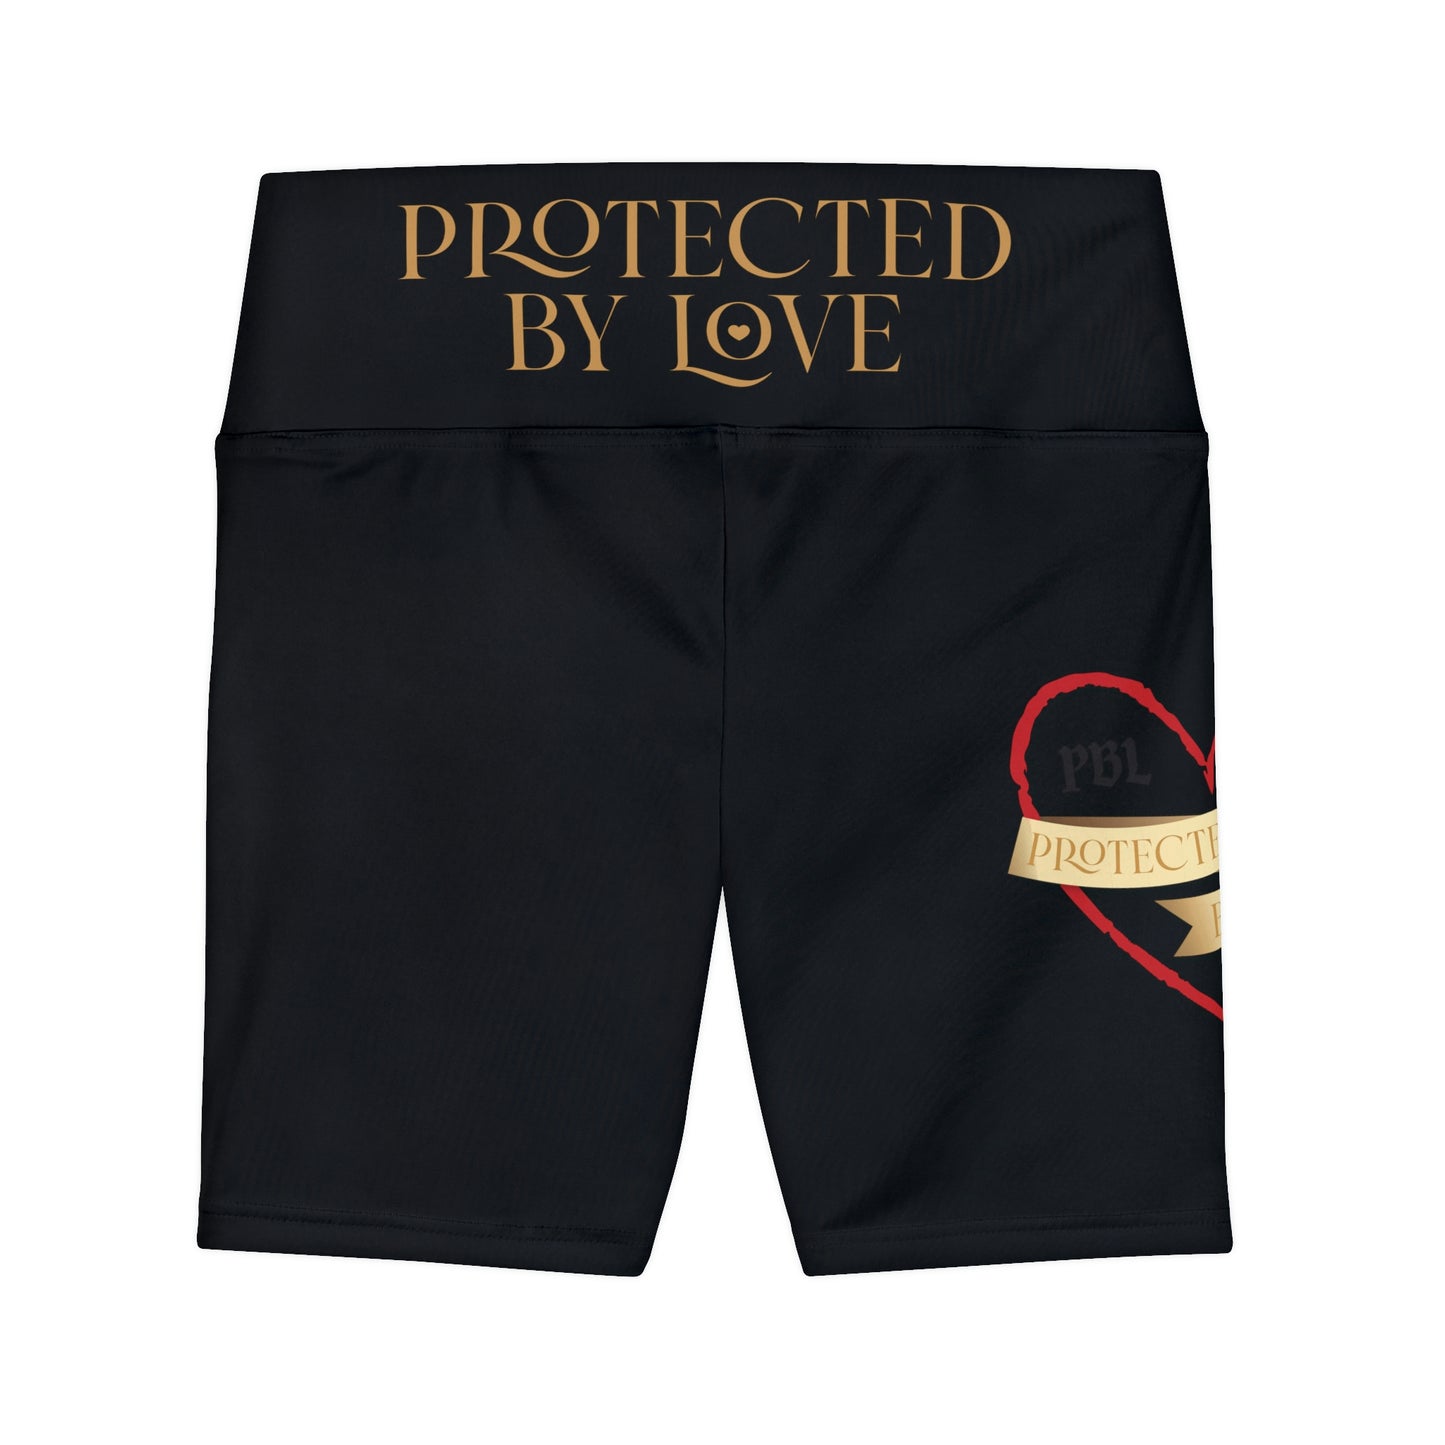 Protected By Love ~ Women's Workout Shorts